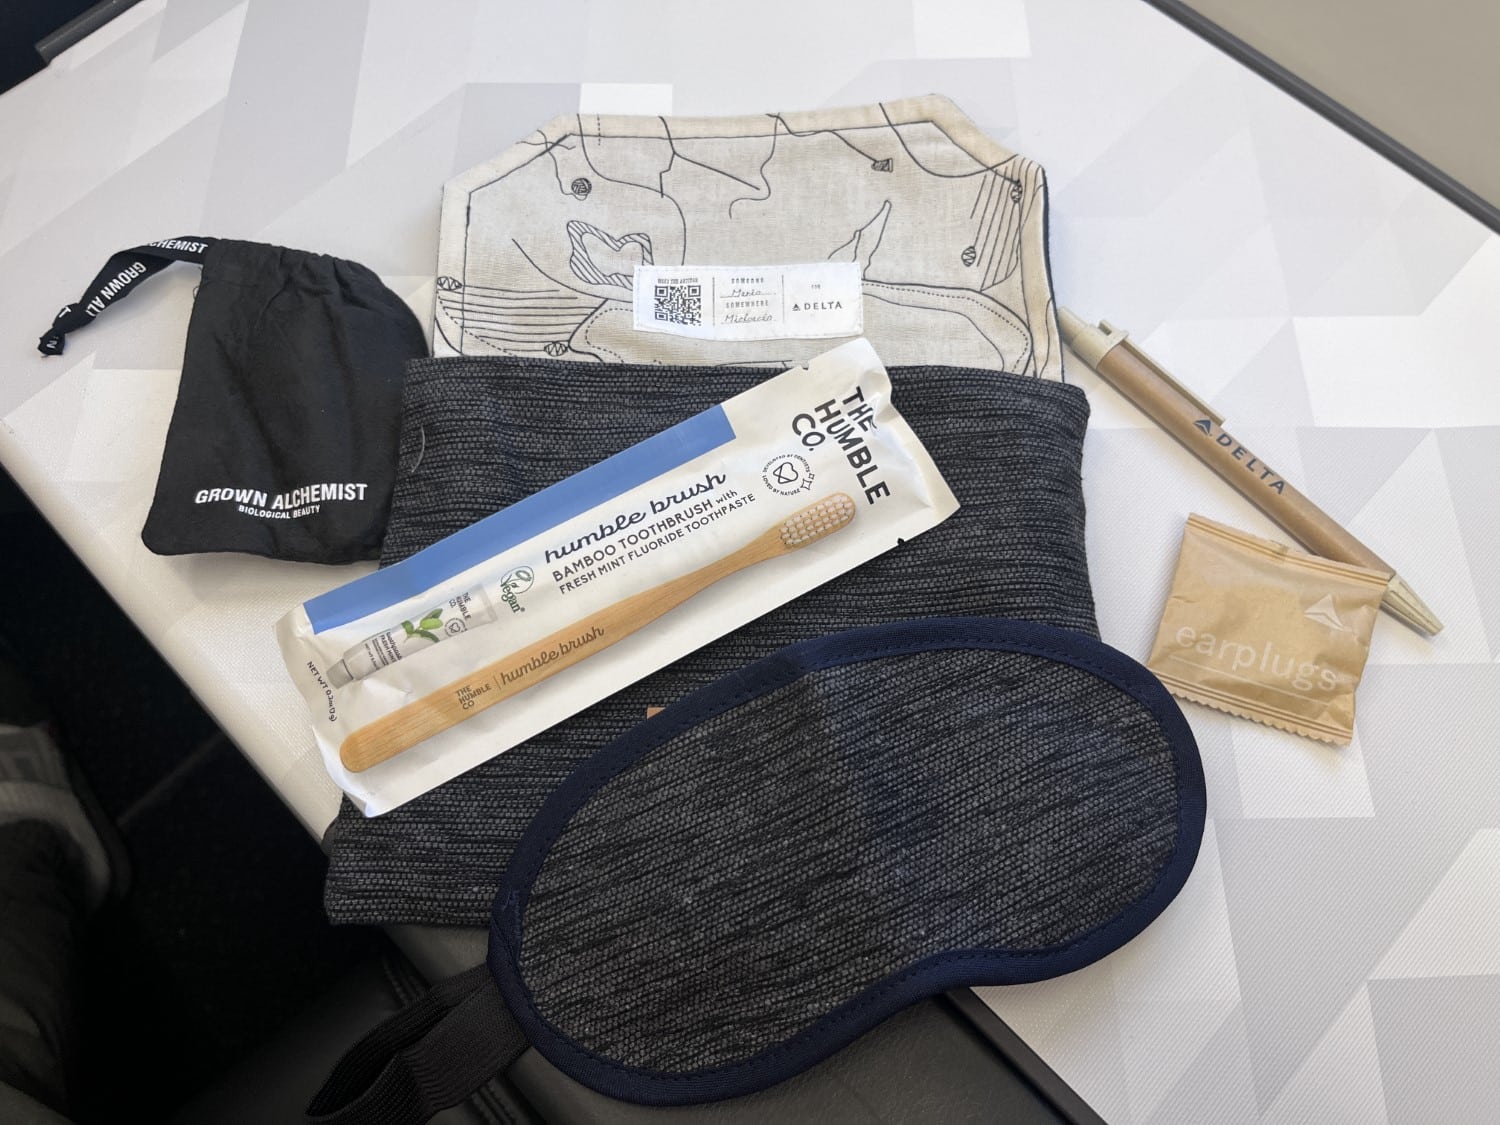 delta one amenity kit contents